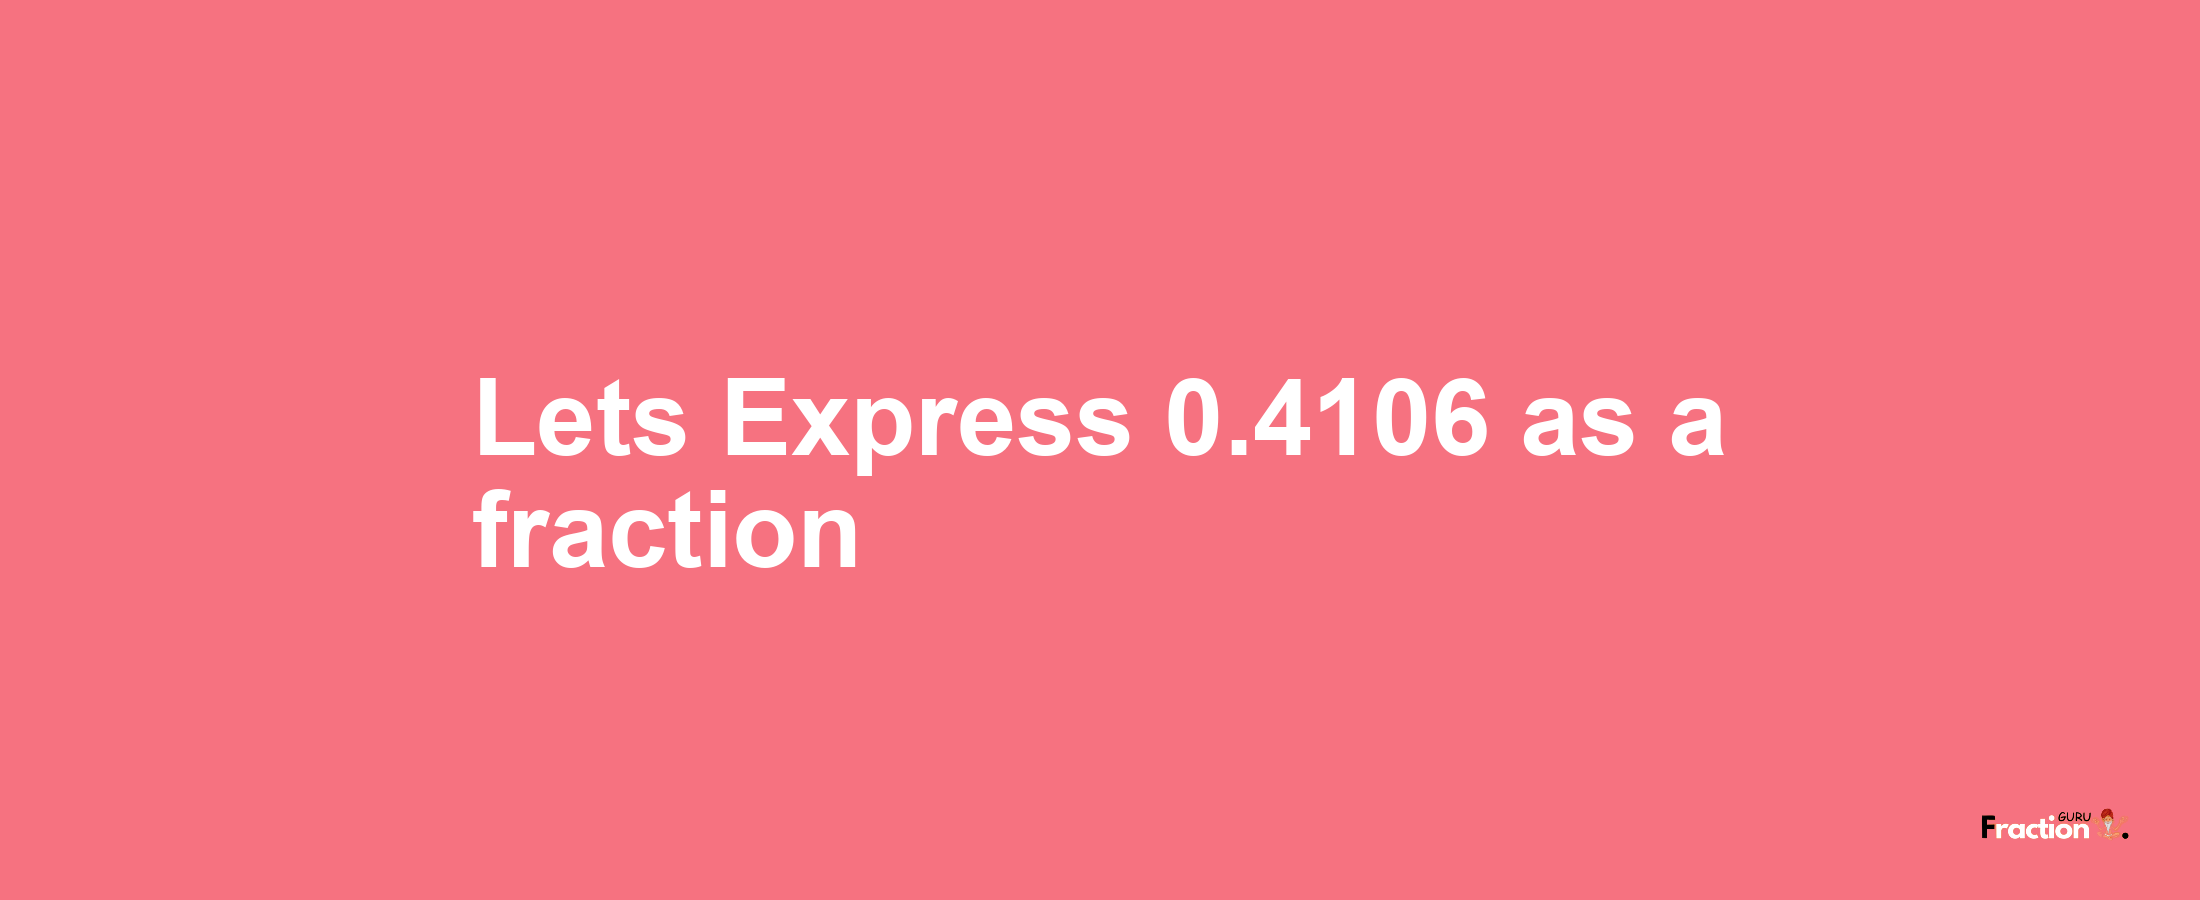 Lets Express 0.4106 as afraction